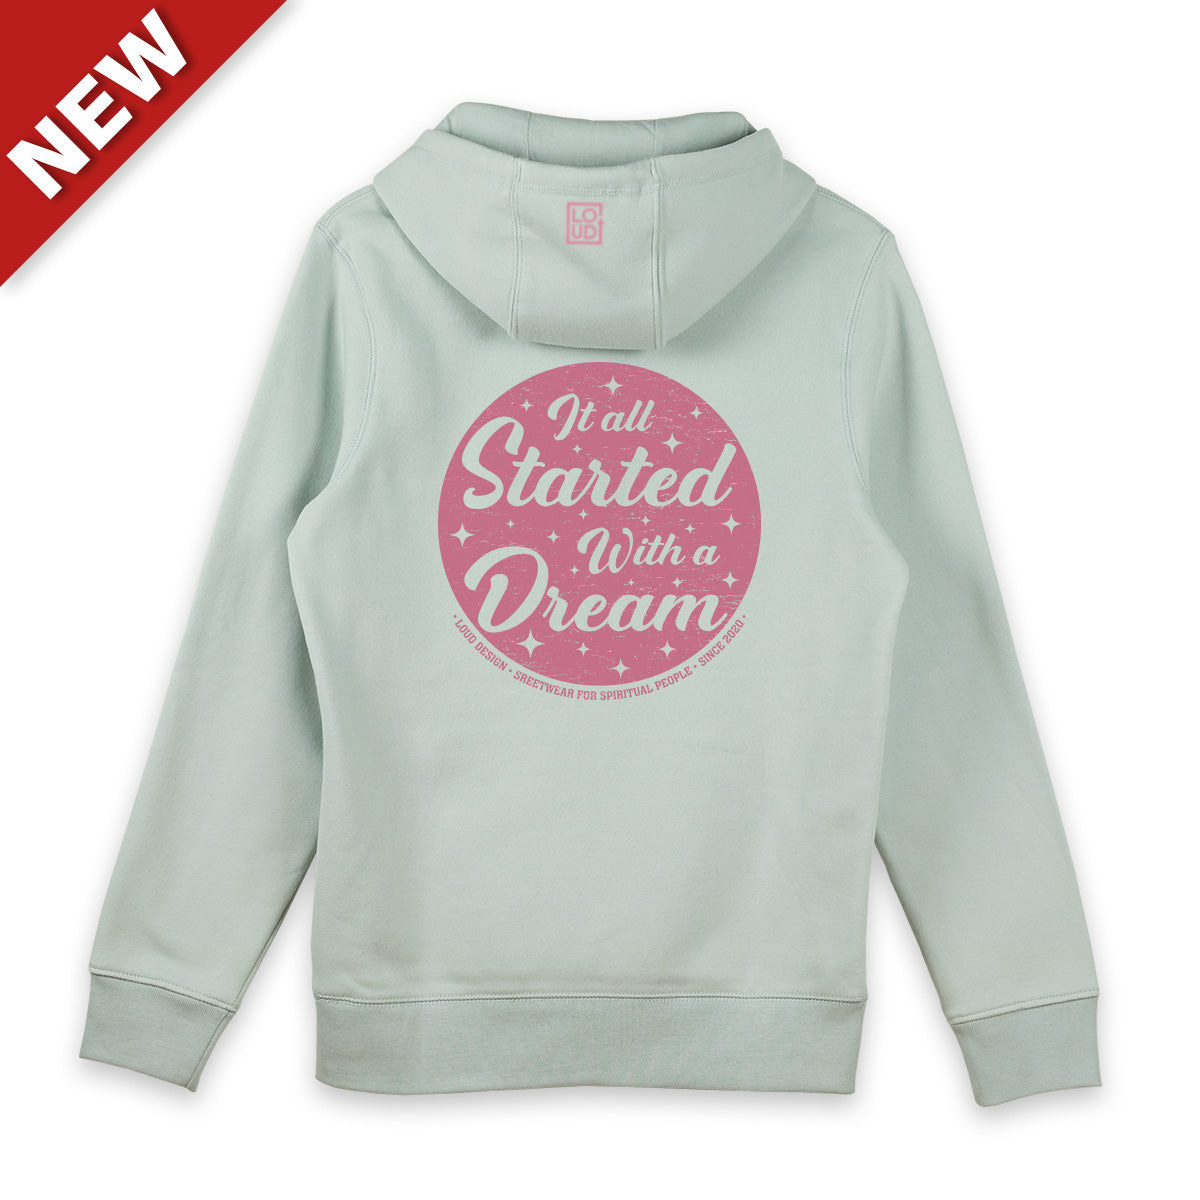 "It All Started With A Dream" Unisex Hoodie